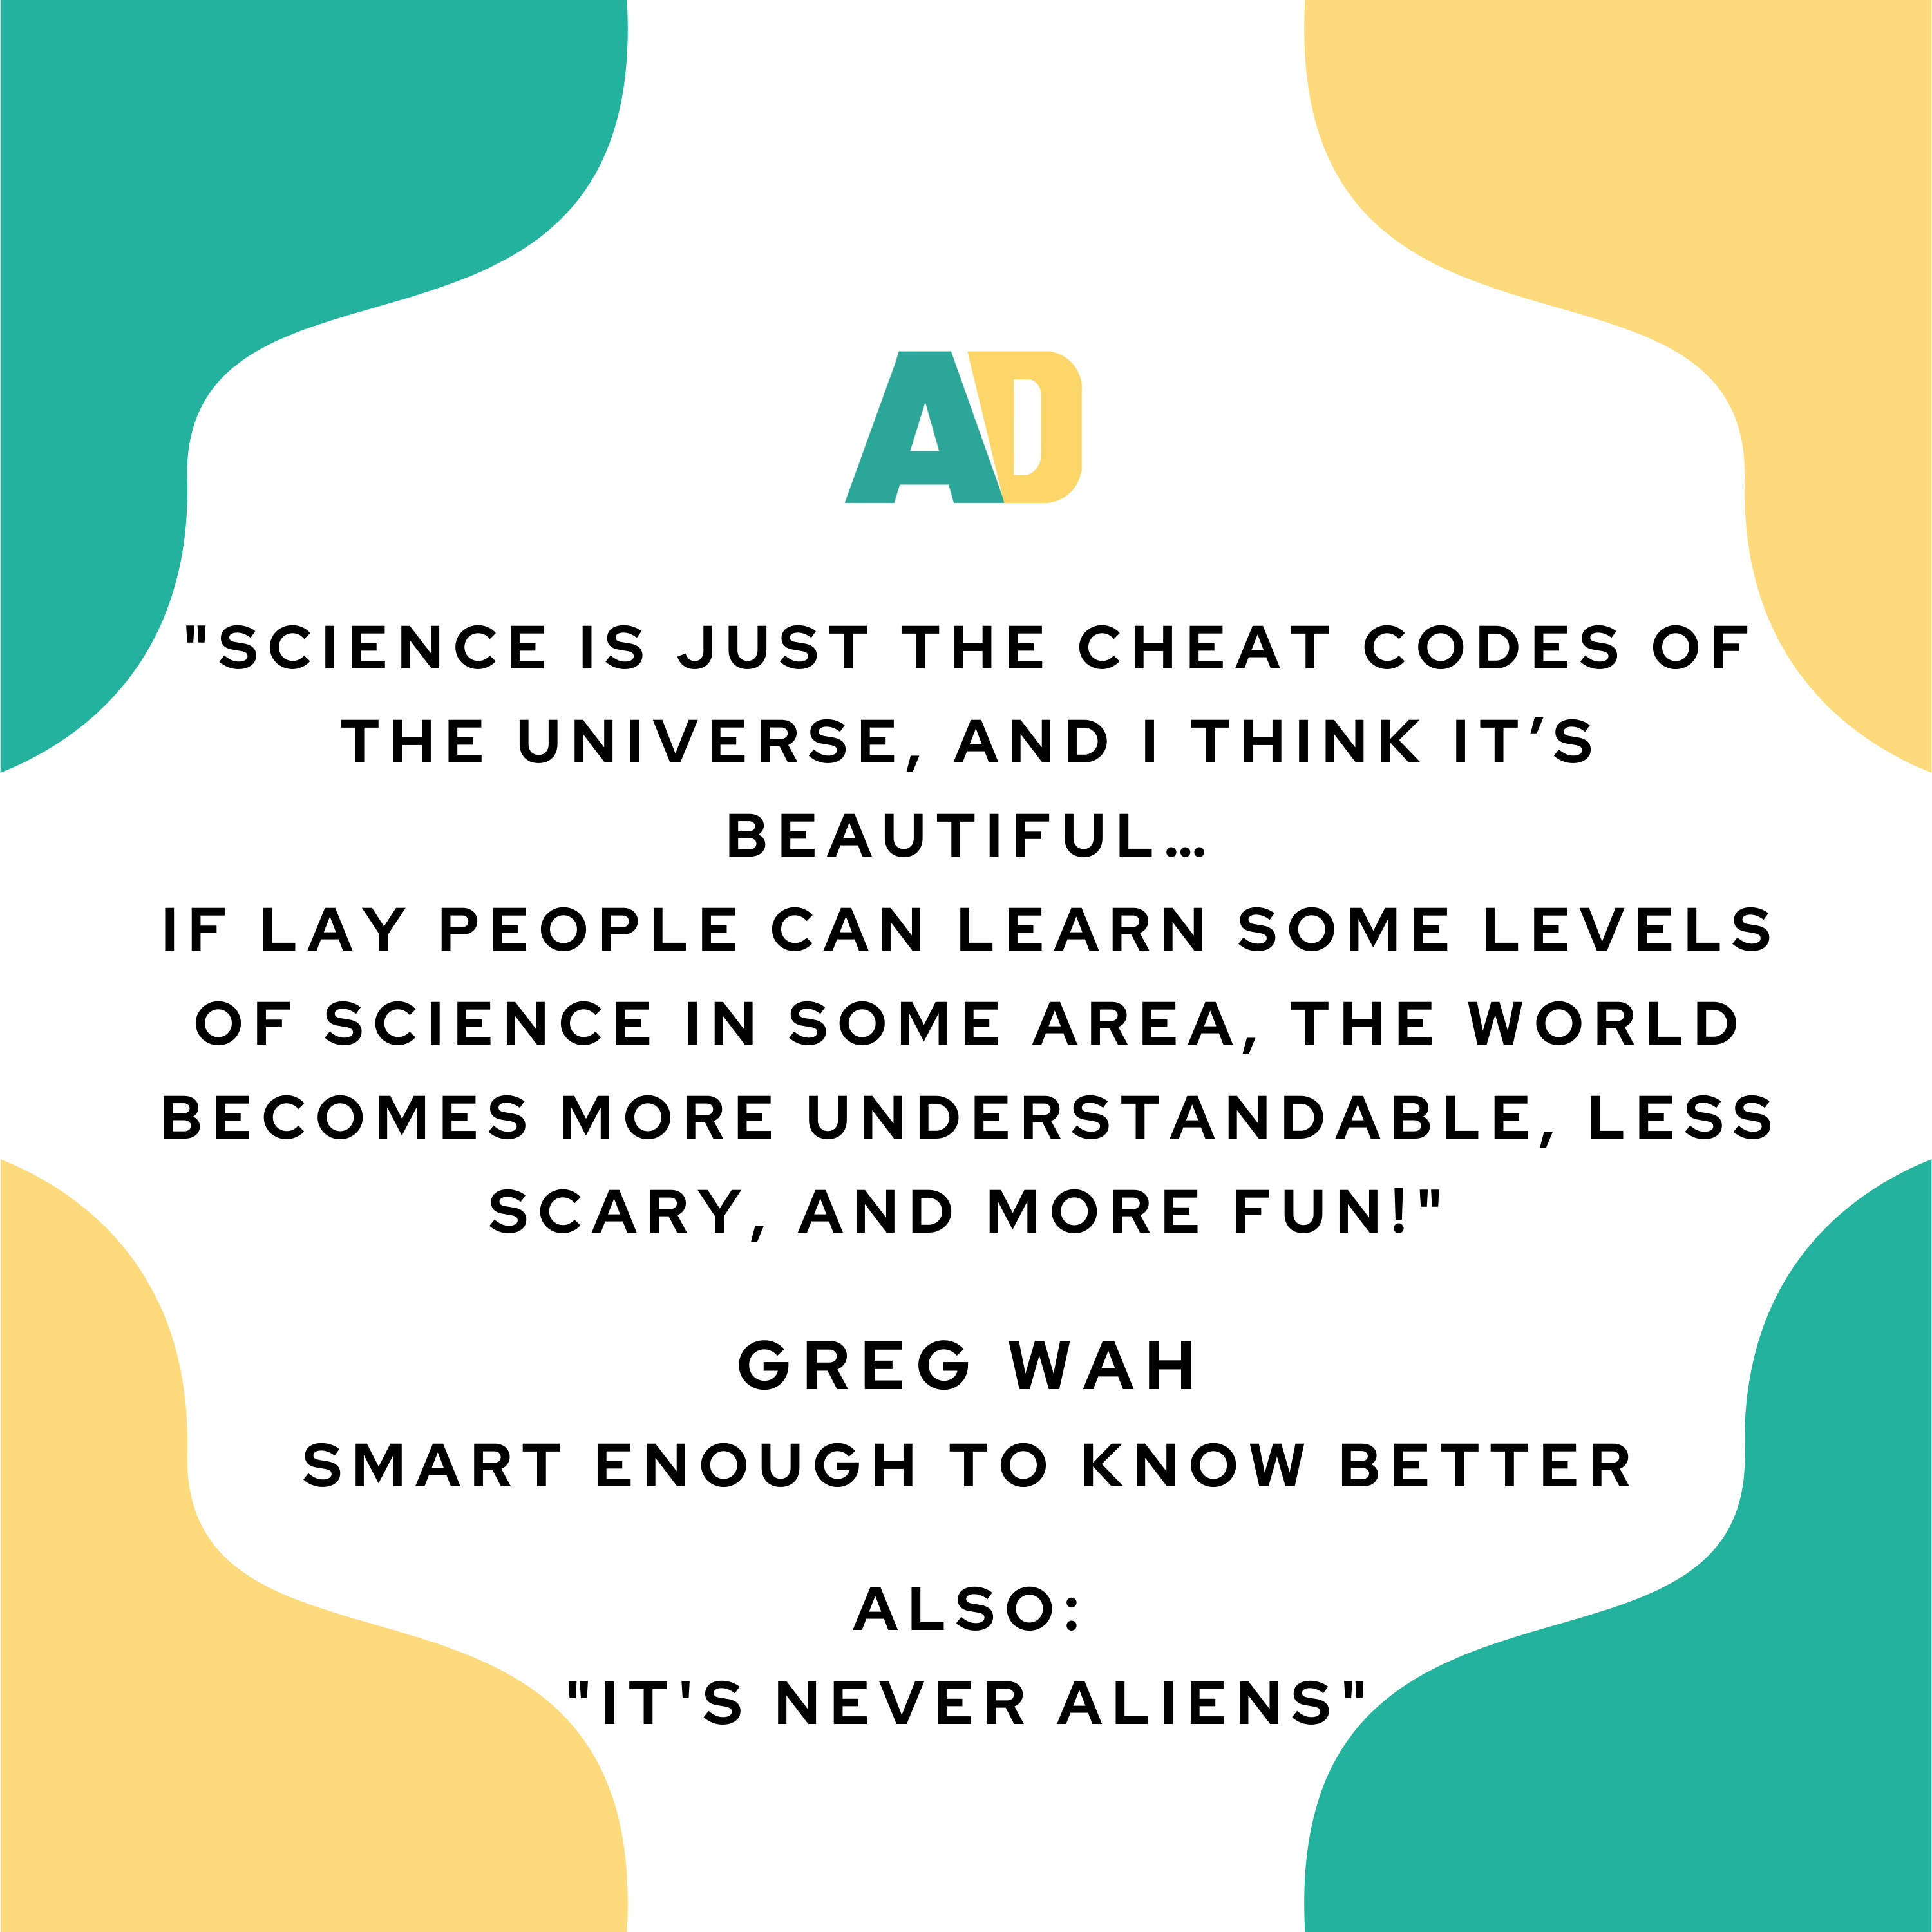 10. Smart Enough to Love SCIENCE!